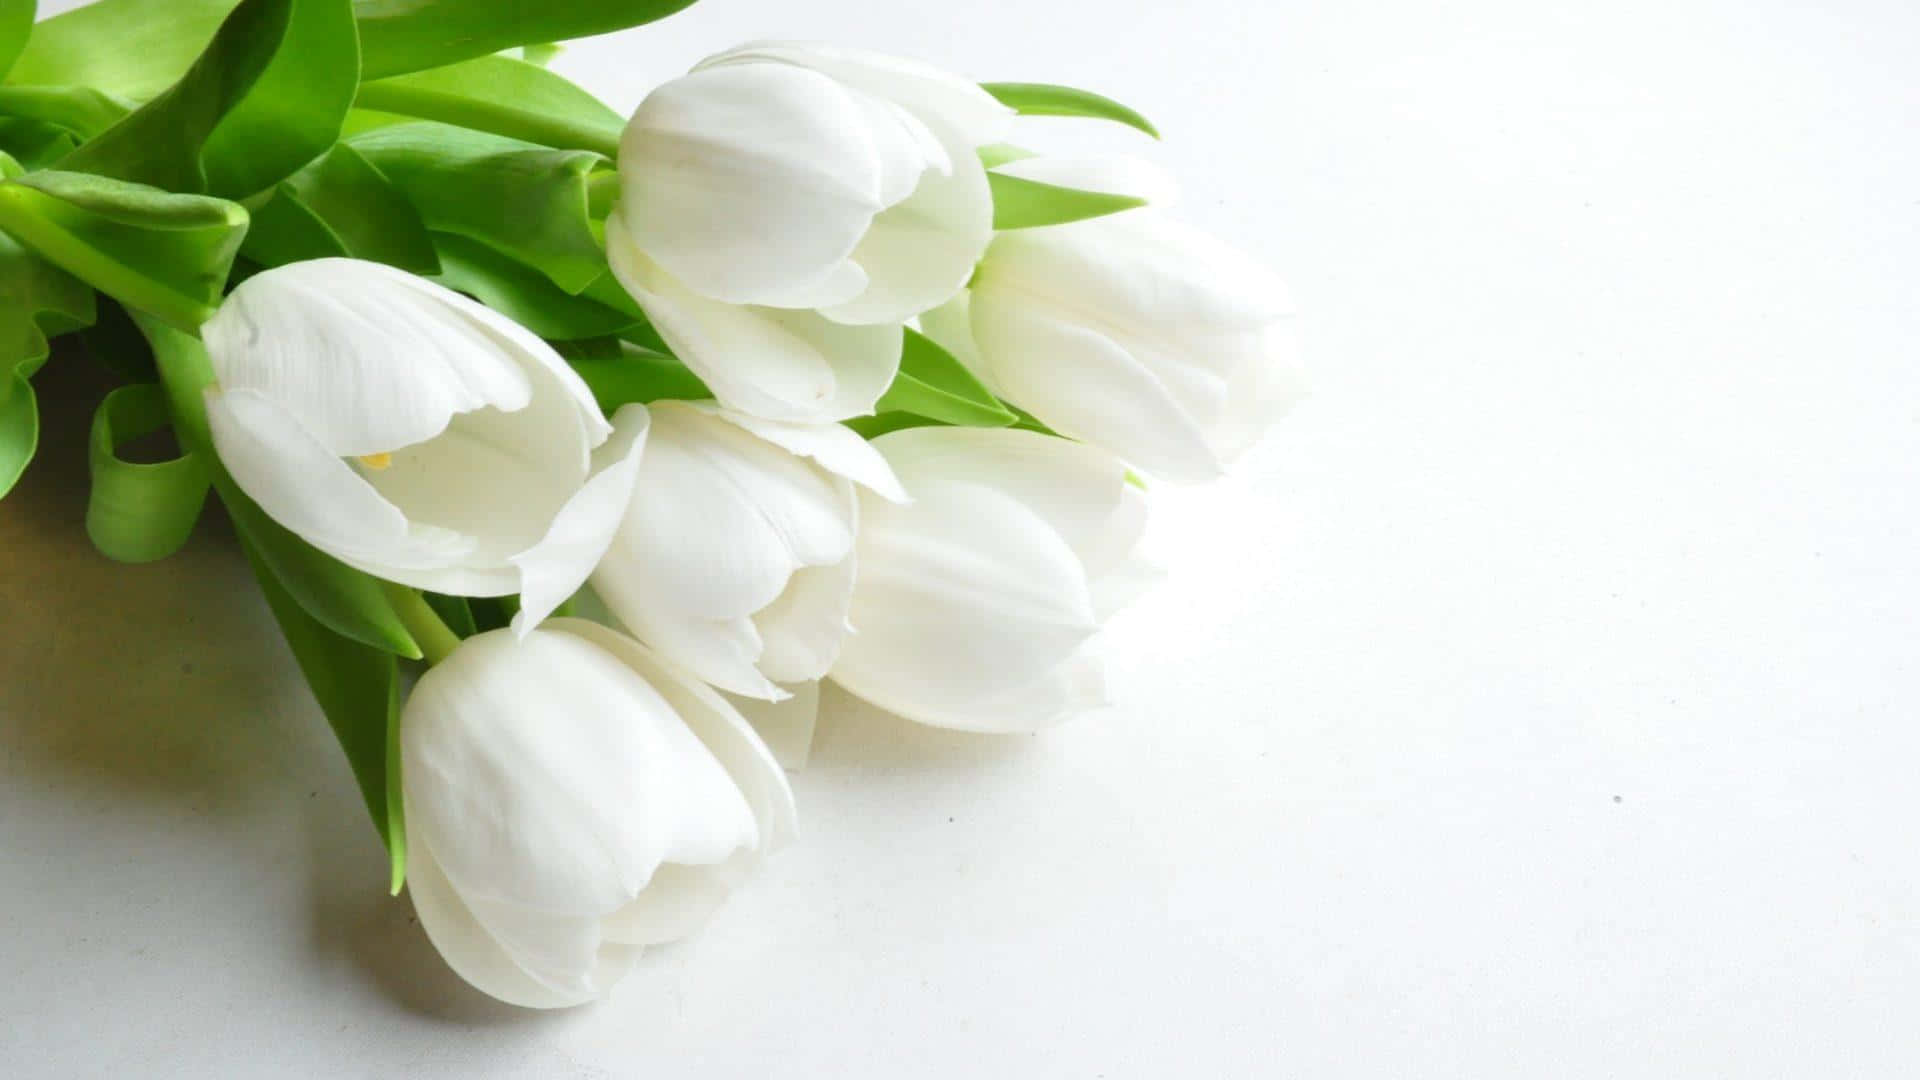 Beautiful White Flowers awaken the senses and bring life to any home or garden.